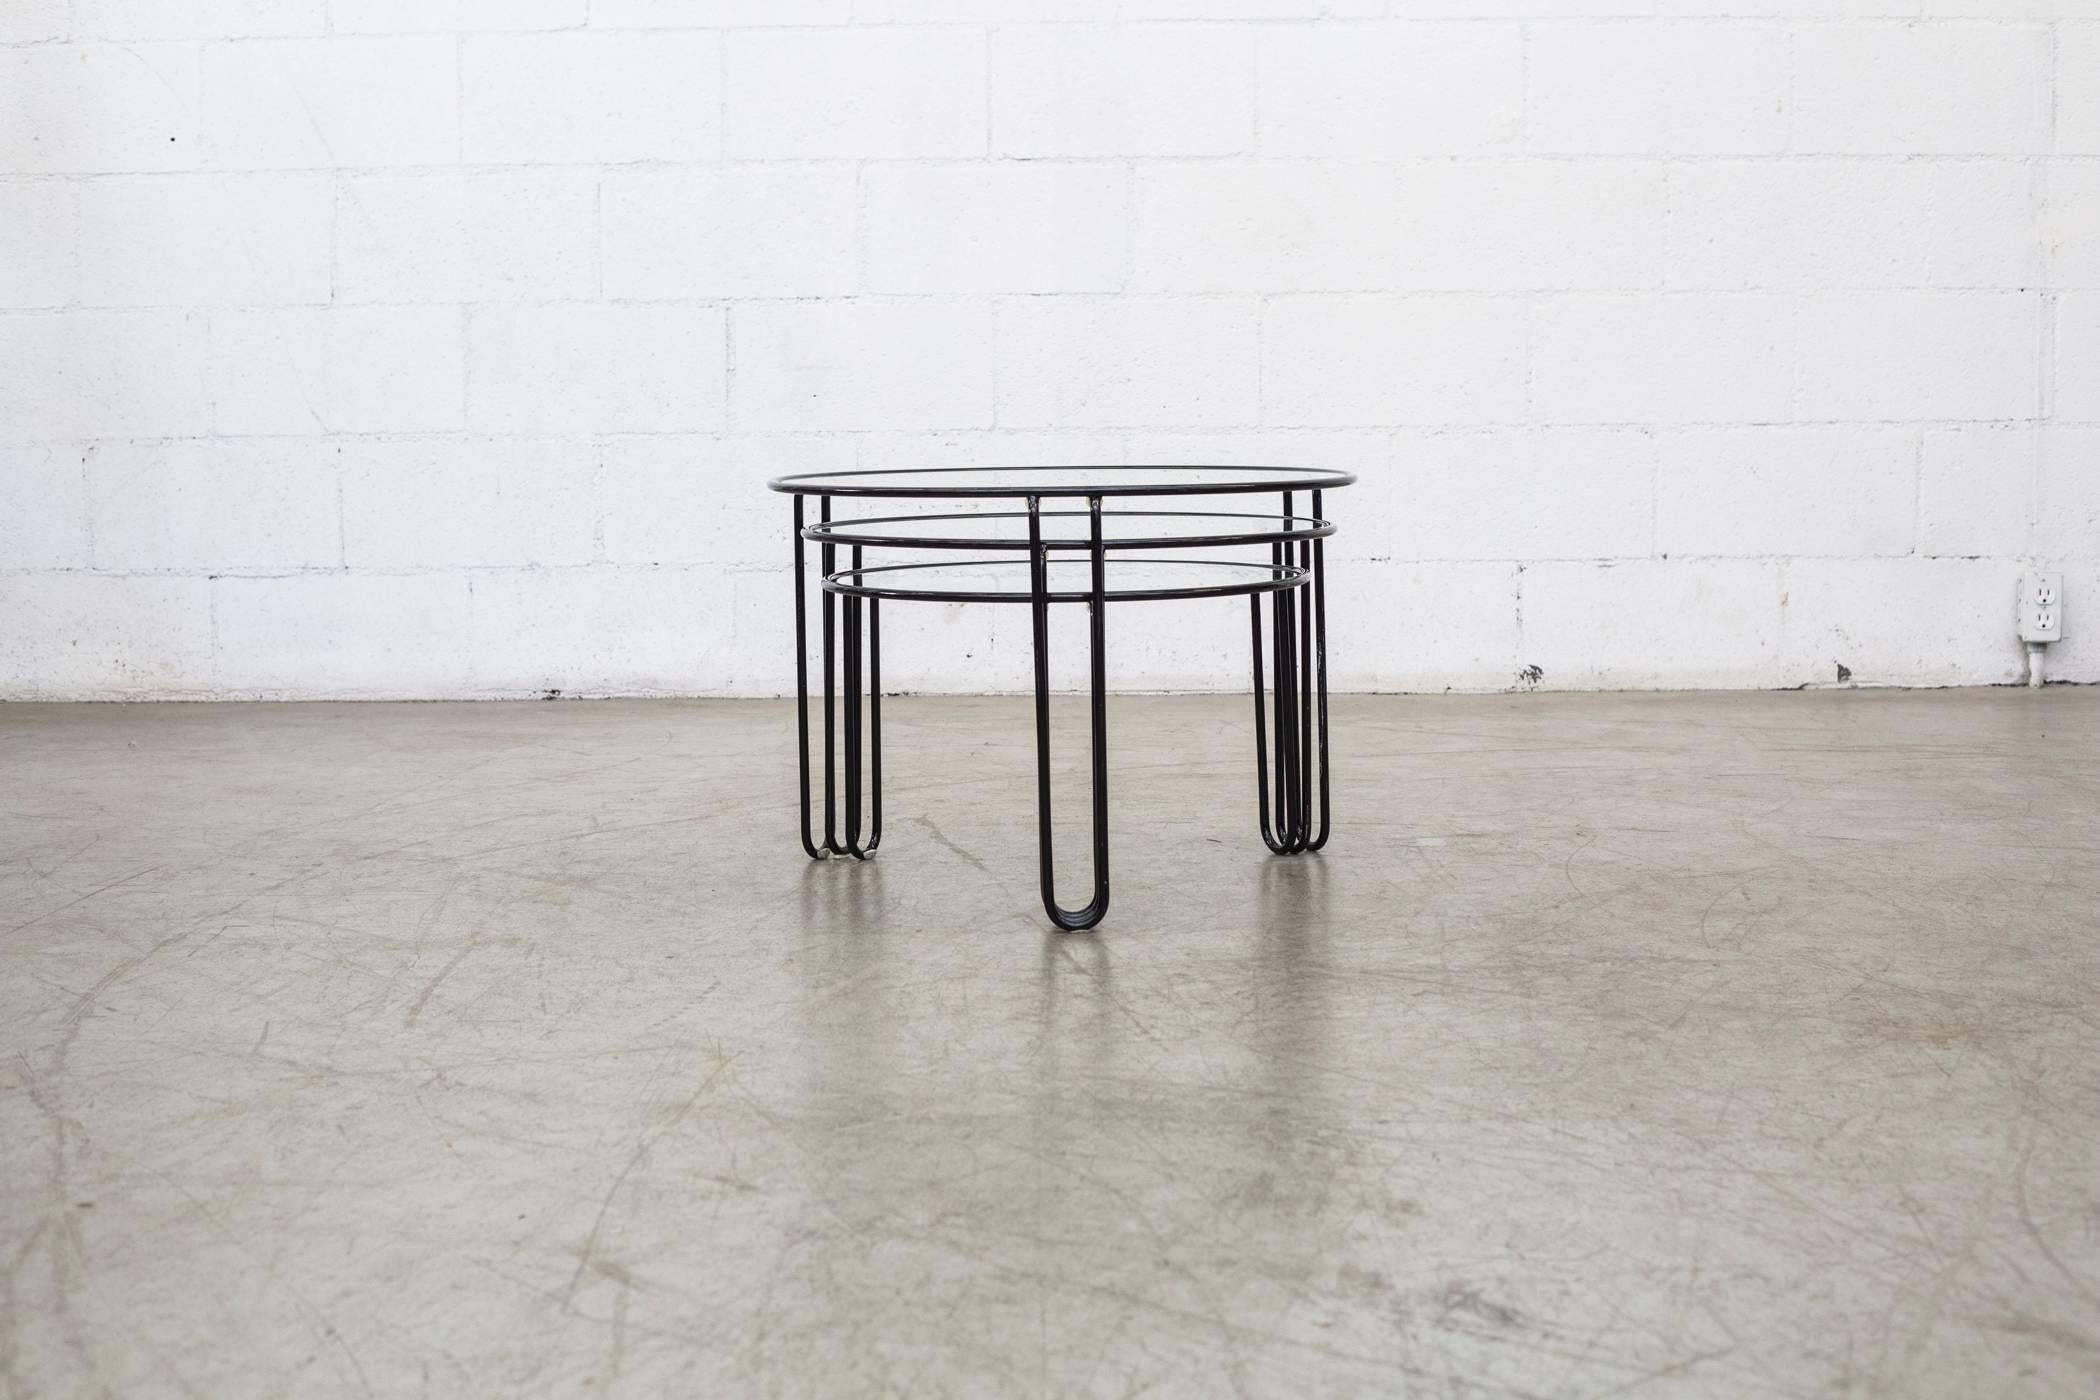 Great set of three black enameled metal Minimalist wire nesting tables with inset glass tops. Good original condition with visible signs of wear consistent with their age and usage. Set price.

(L) 23.25 x 23.25 x 16.25 (M) 21.25 x 21.25 x 14.25